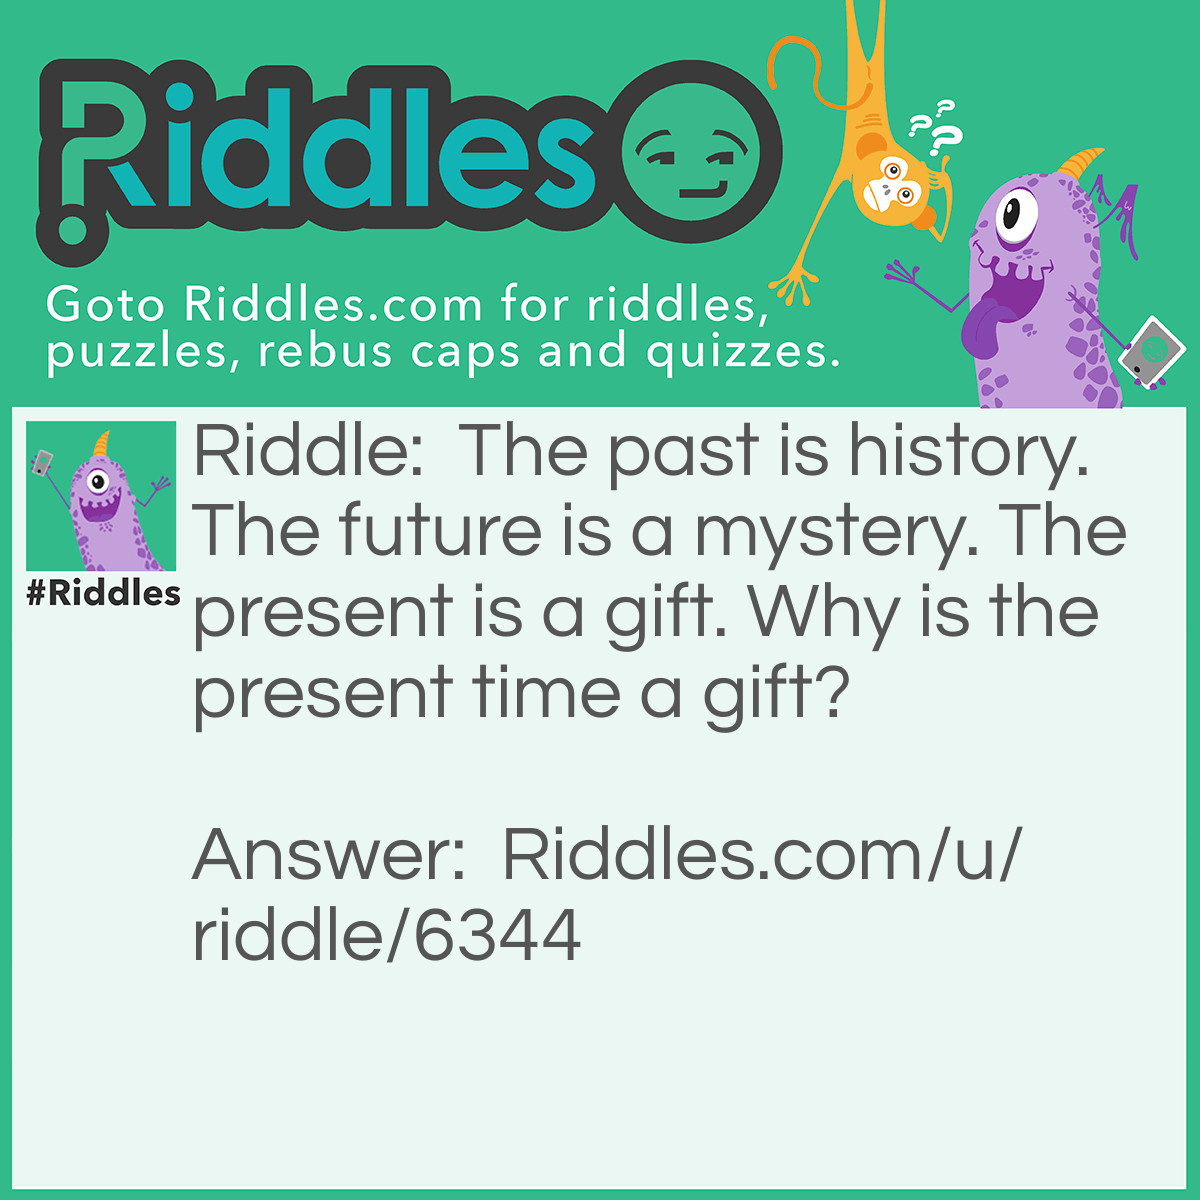 Riddle: The past is history. The future is a mystery. The present is a gift. Why is the present time a gift? Answer: The present time is a gift because you might not see the mystery of tomorrow.